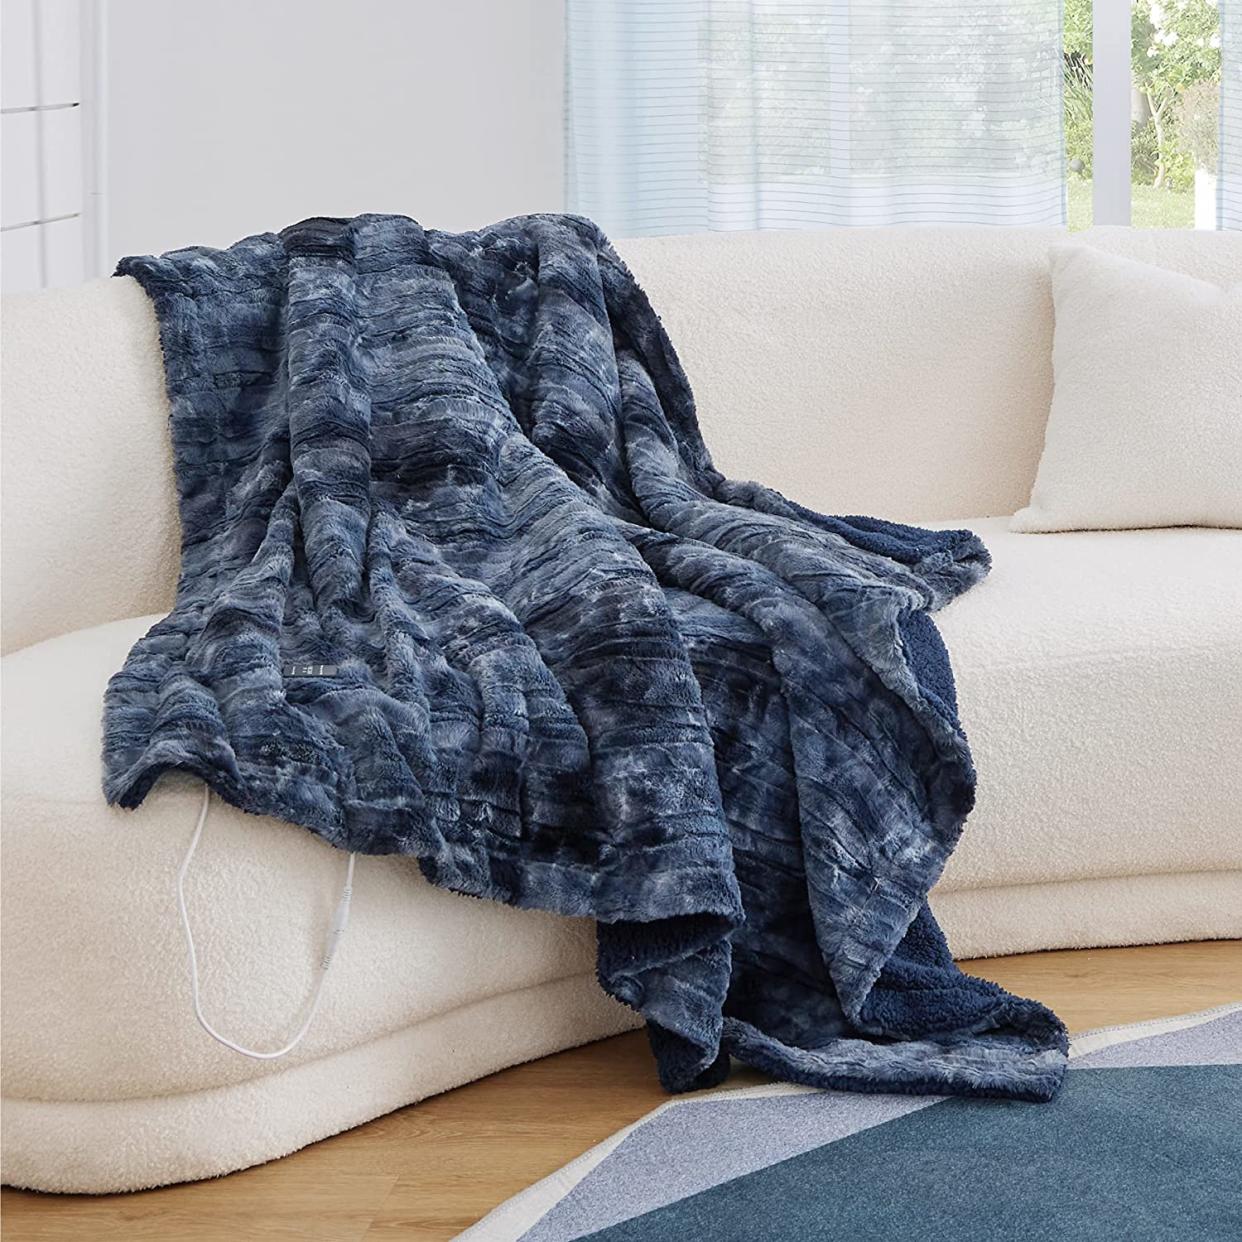 Bedsure Low-Voltage Electric Heated Blanket Throw